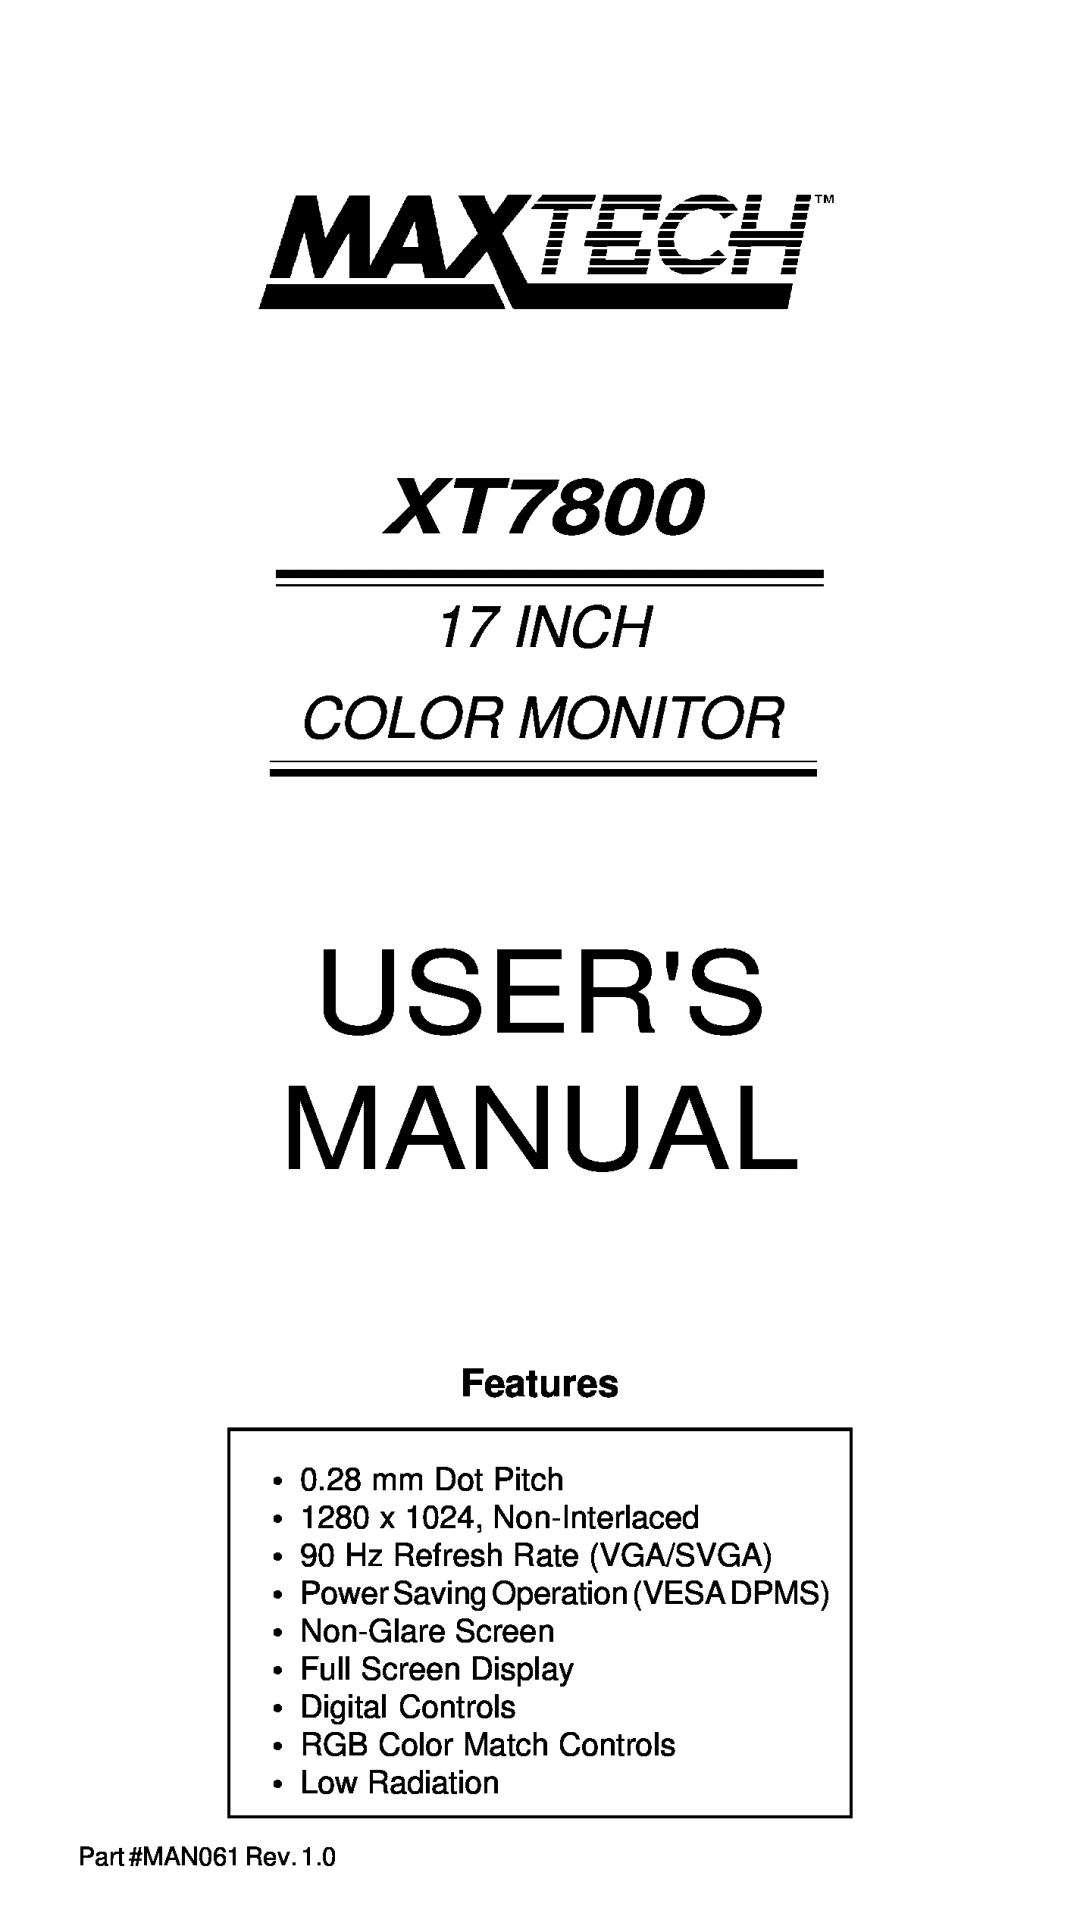 MaxTech XT7800 user manual Users Manual, Inch Color Monitor, Features, mm Dot Pitch 1280 x 1024, Non-Interlaced 